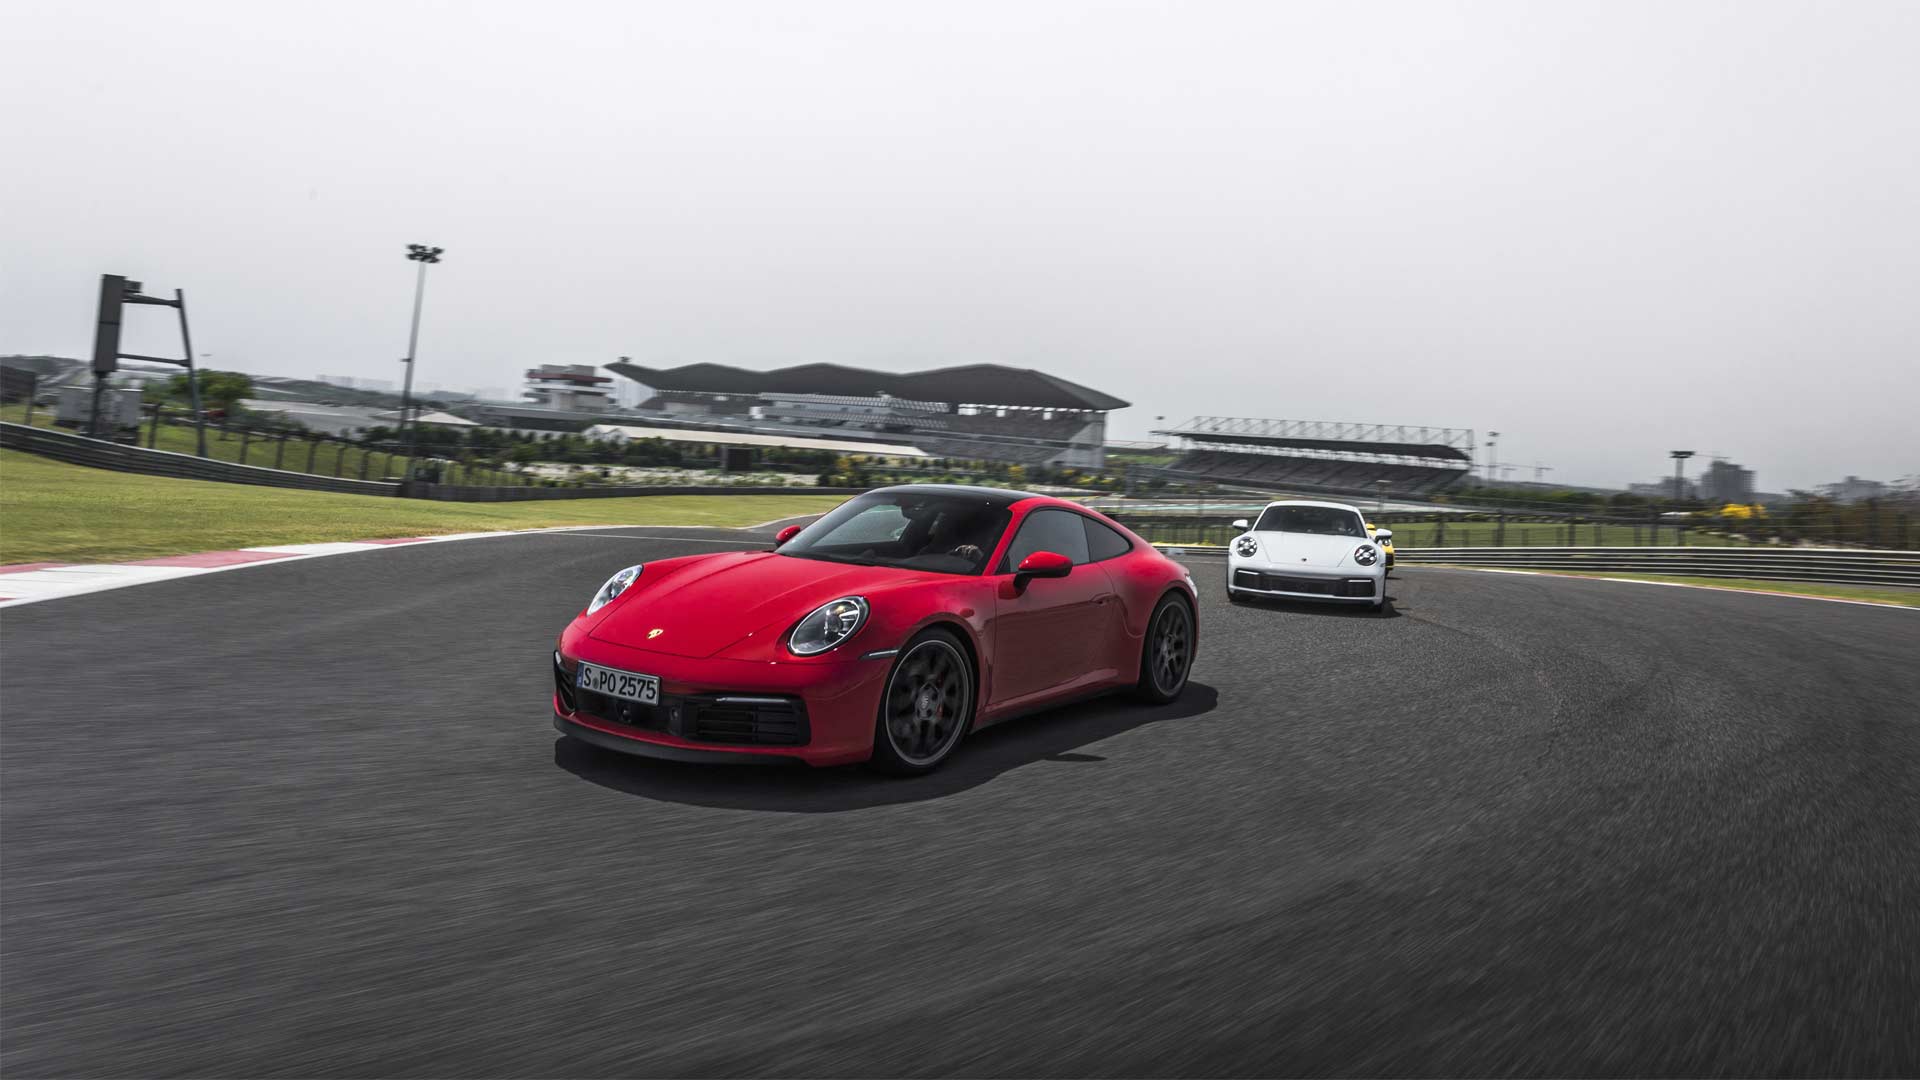 8th-generation-of-the-Porsche-911-India-launch-2019-Buddh-International-Circuit_2